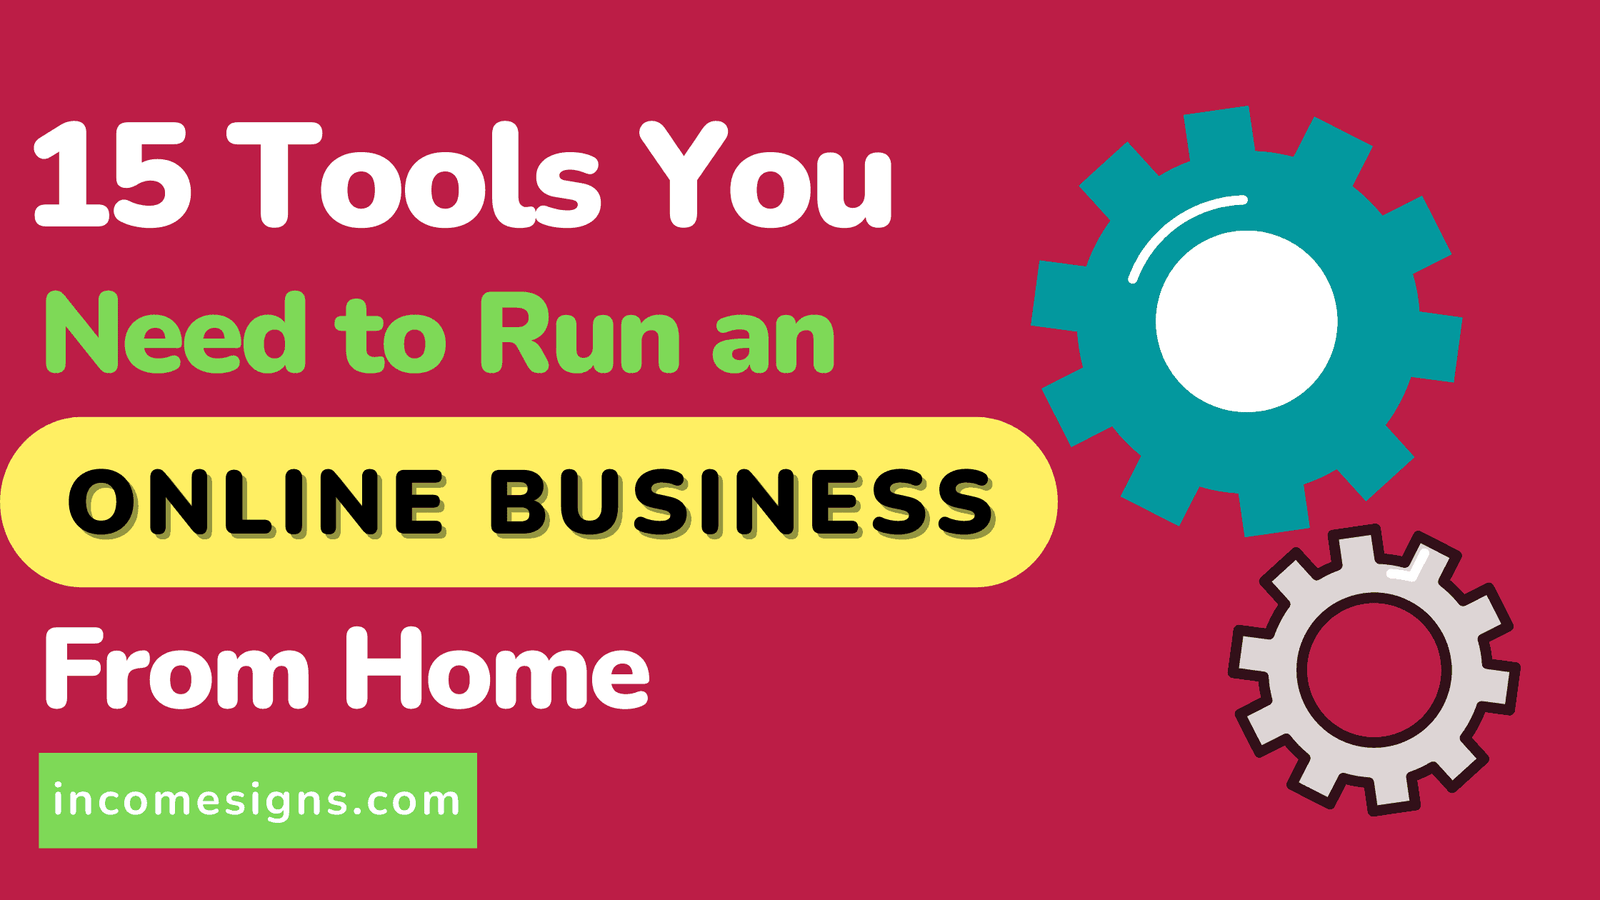 15 Tools You Need to Start an Online Business from Home